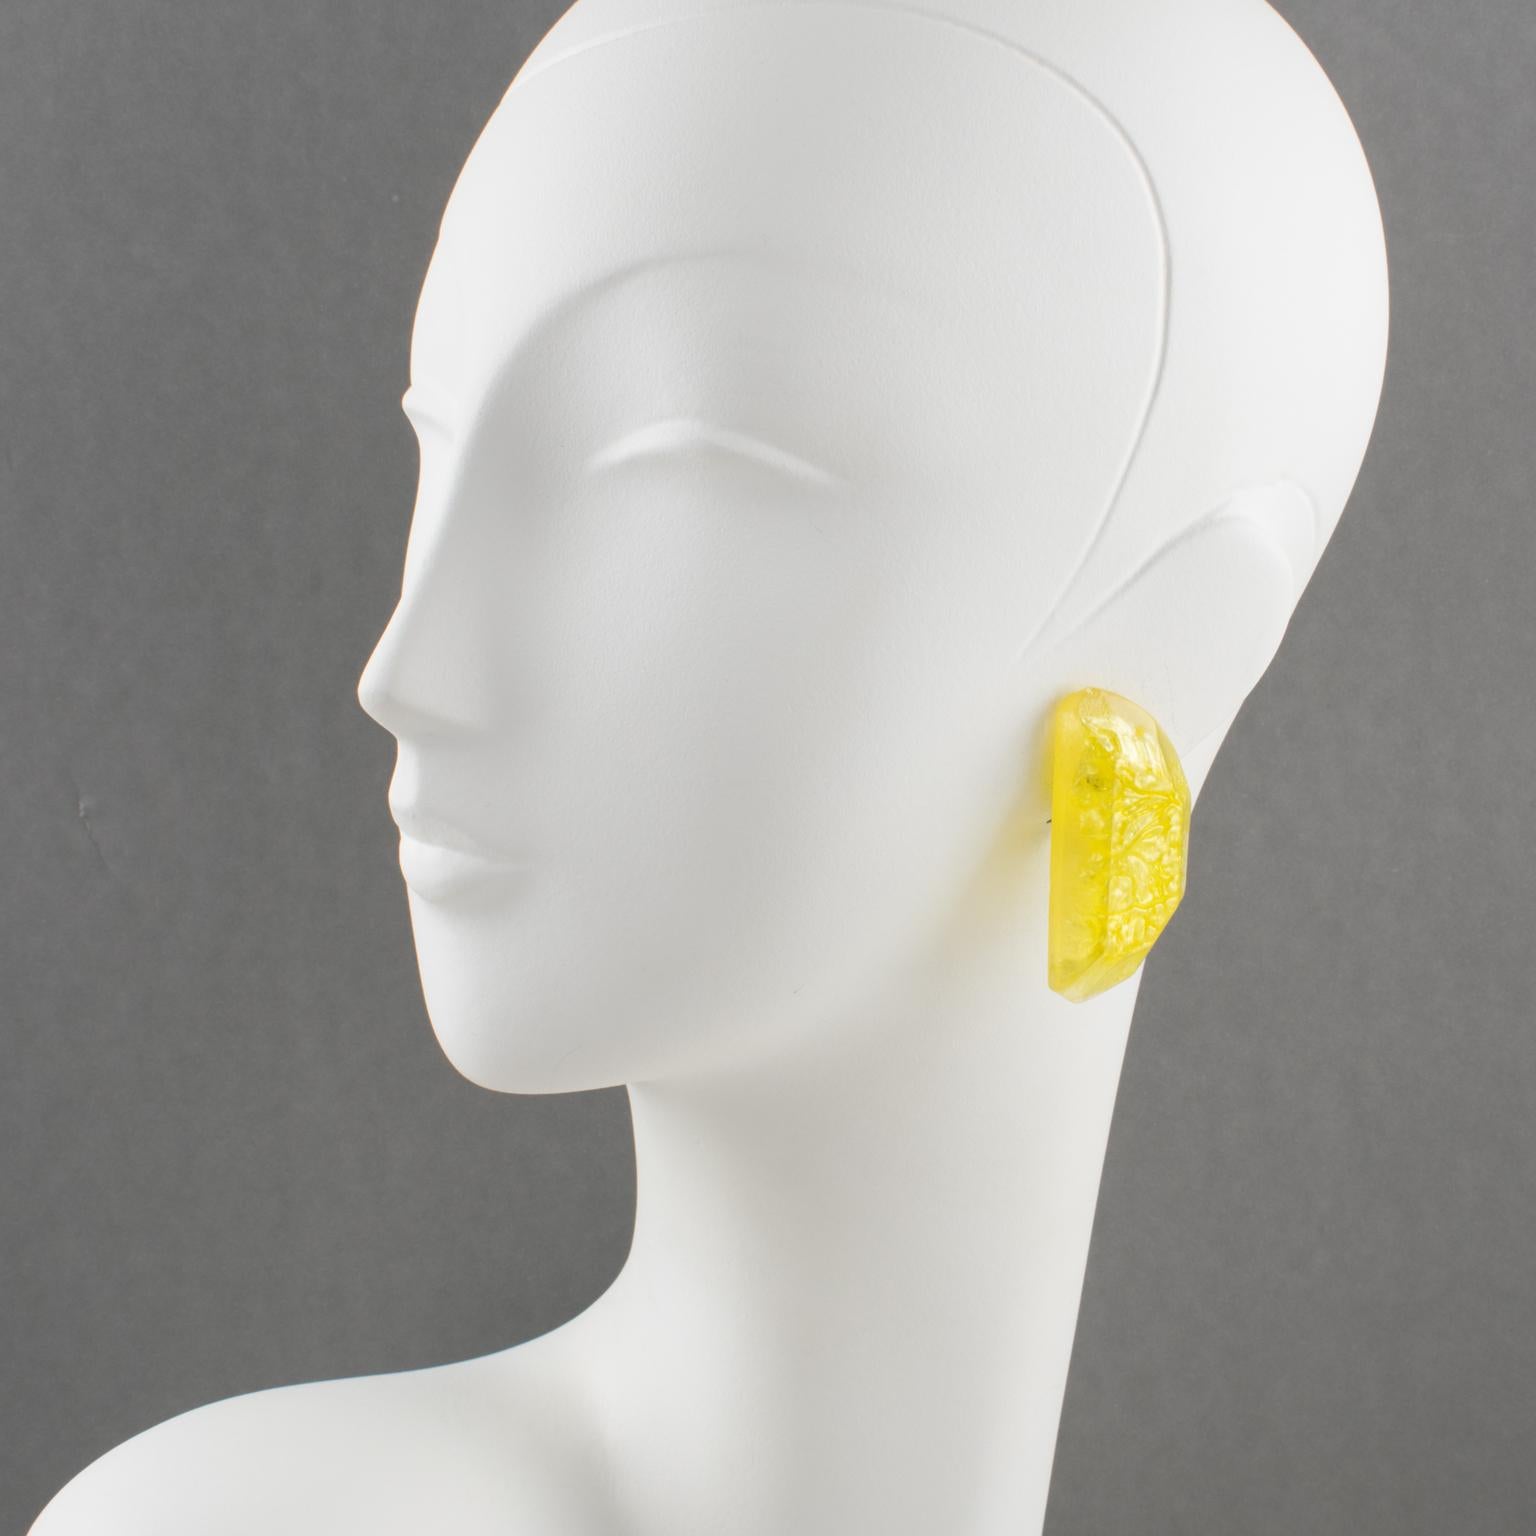 Harrier Bauknight for Kaso designed those lovely Lucite clip-on earrings in the 1980s. They feature a dimensional lemon slice shape with a pearlized pattern in lemon drop color and deeply faceted beveling edges. The Kaso paper sticker tag has been